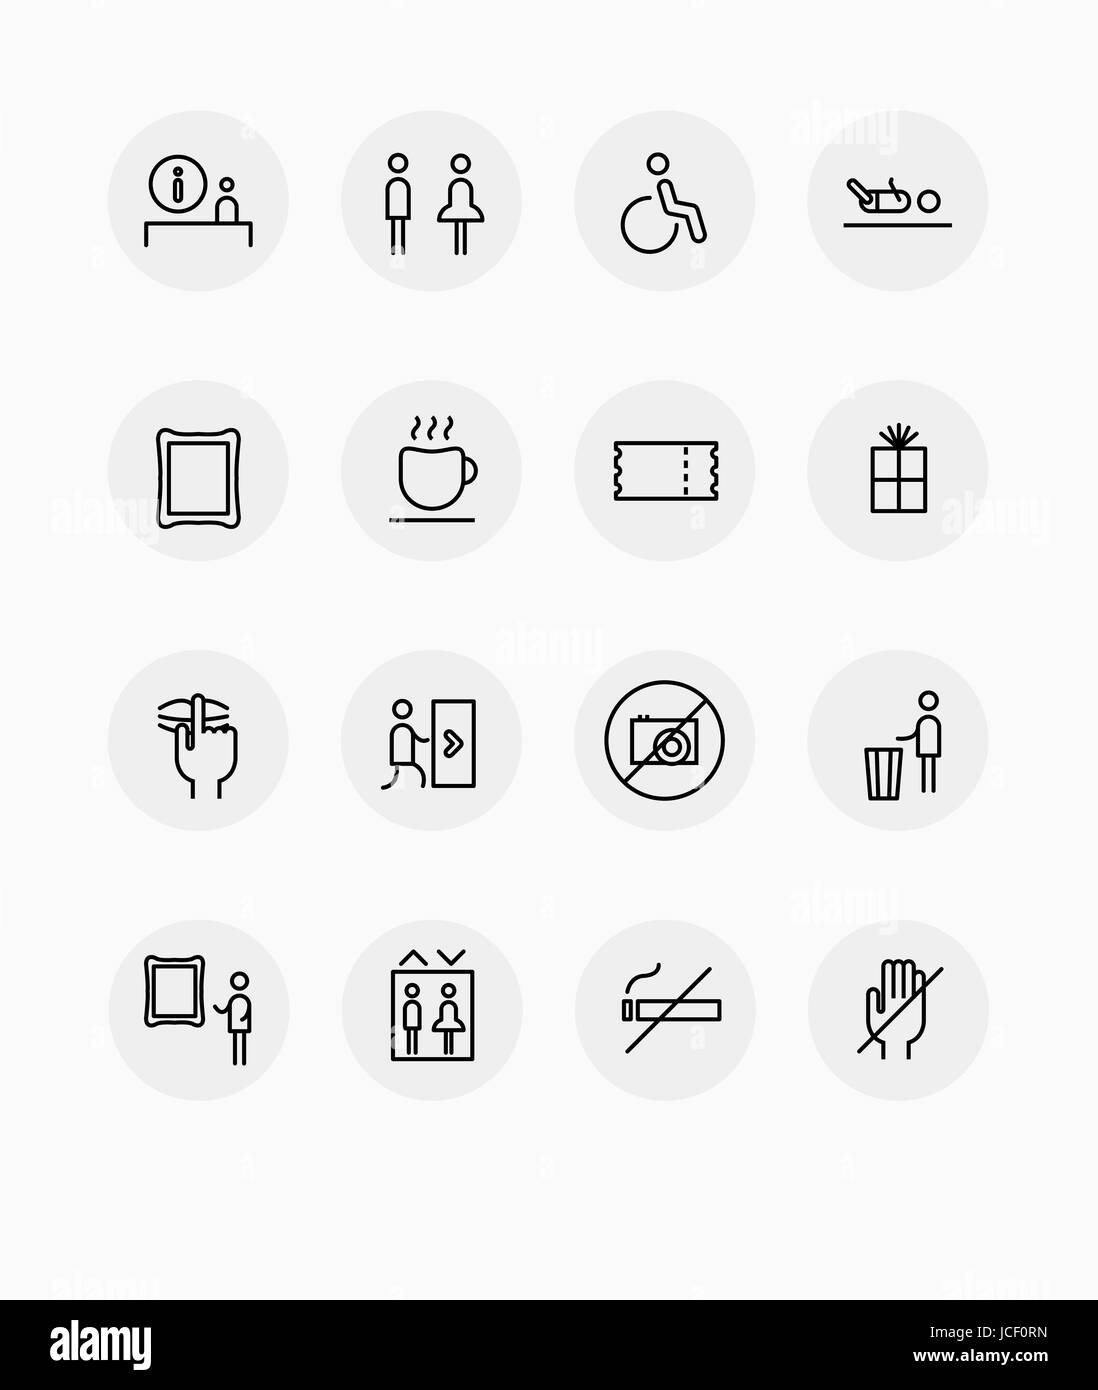 Set of pictogram icons related to museum Stock Photo